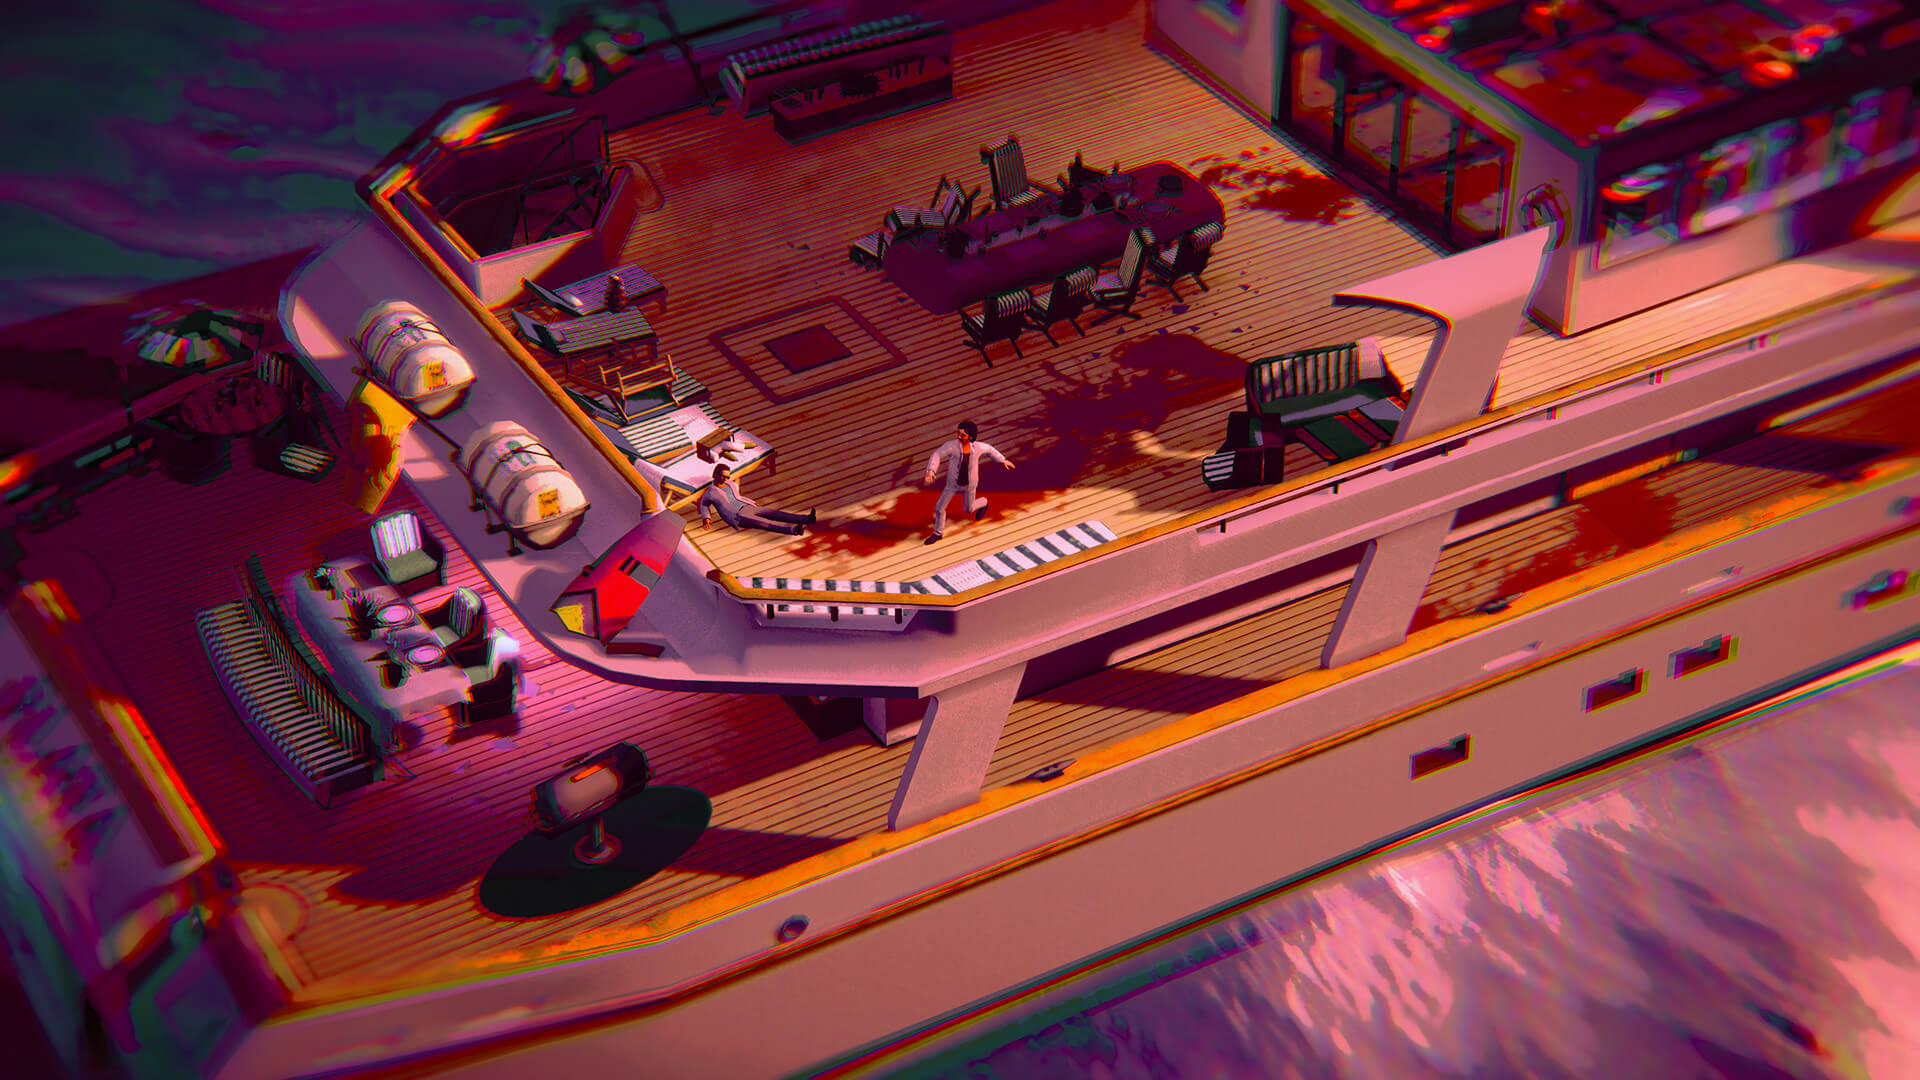 A gameplay screenshot of Serial Cleaners, showcasing a suited bob running across the deck of a yacht while cleaning up a crime scene.